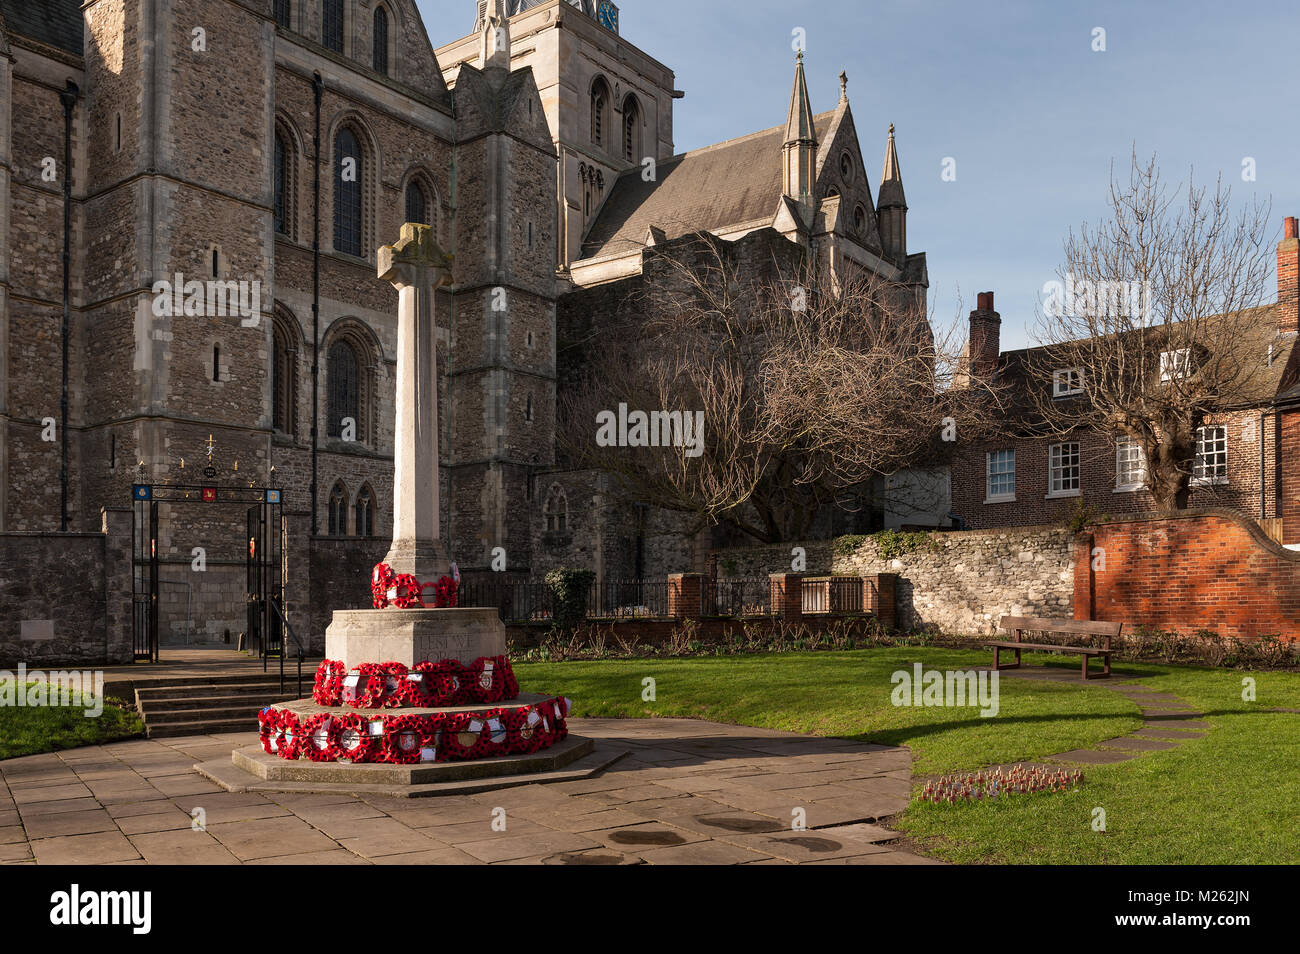 Remembrance Sunday, The Royal British Legion poppies still remain well kept and maintained in second oldest memorial garden, Rochester Cathedral 604AD Stock Photo